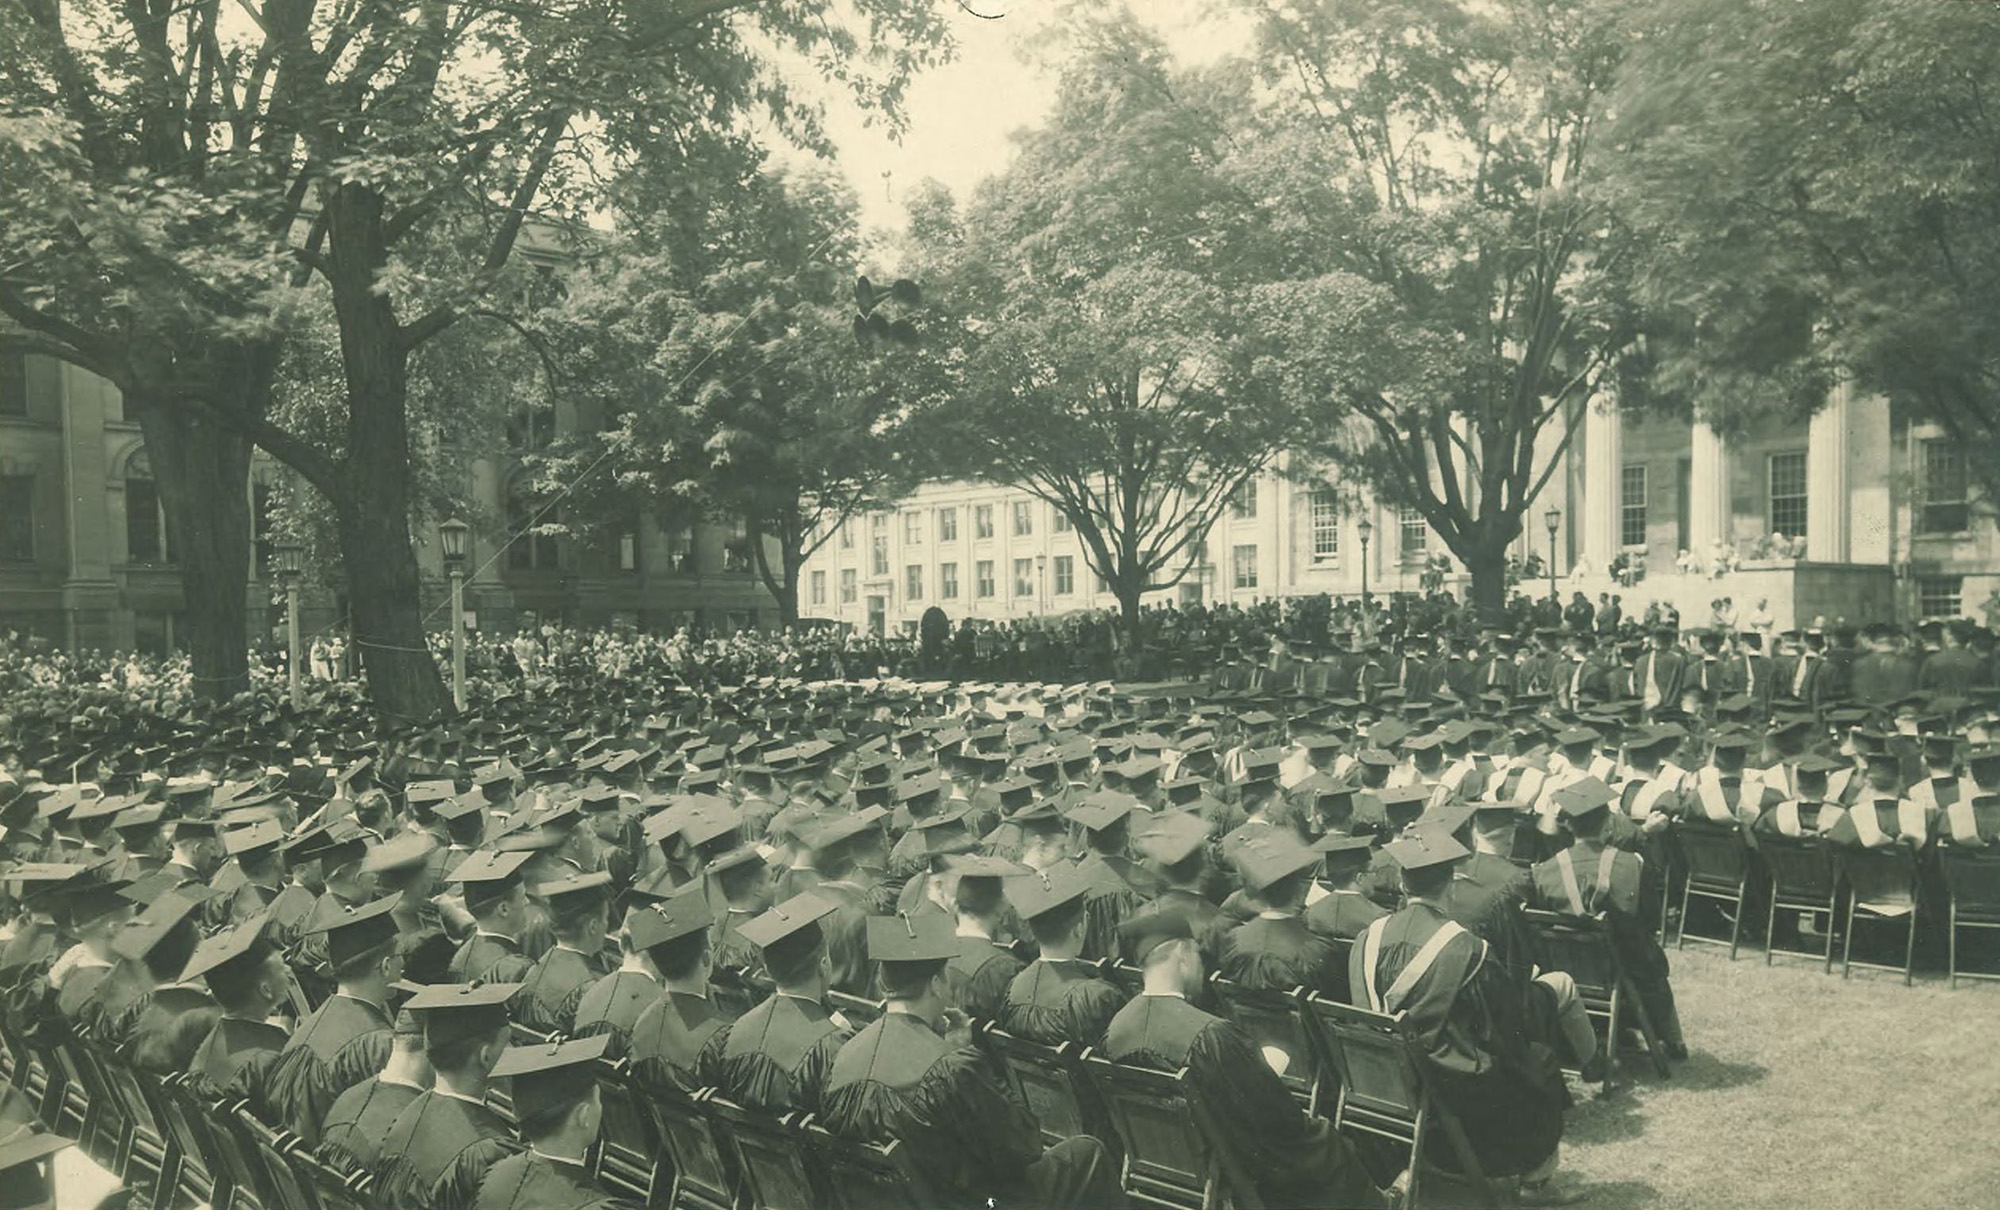 A commencement ceremony featuring hundreds of graduates outside Old Capitol at the University of Iowa in the early 20th century